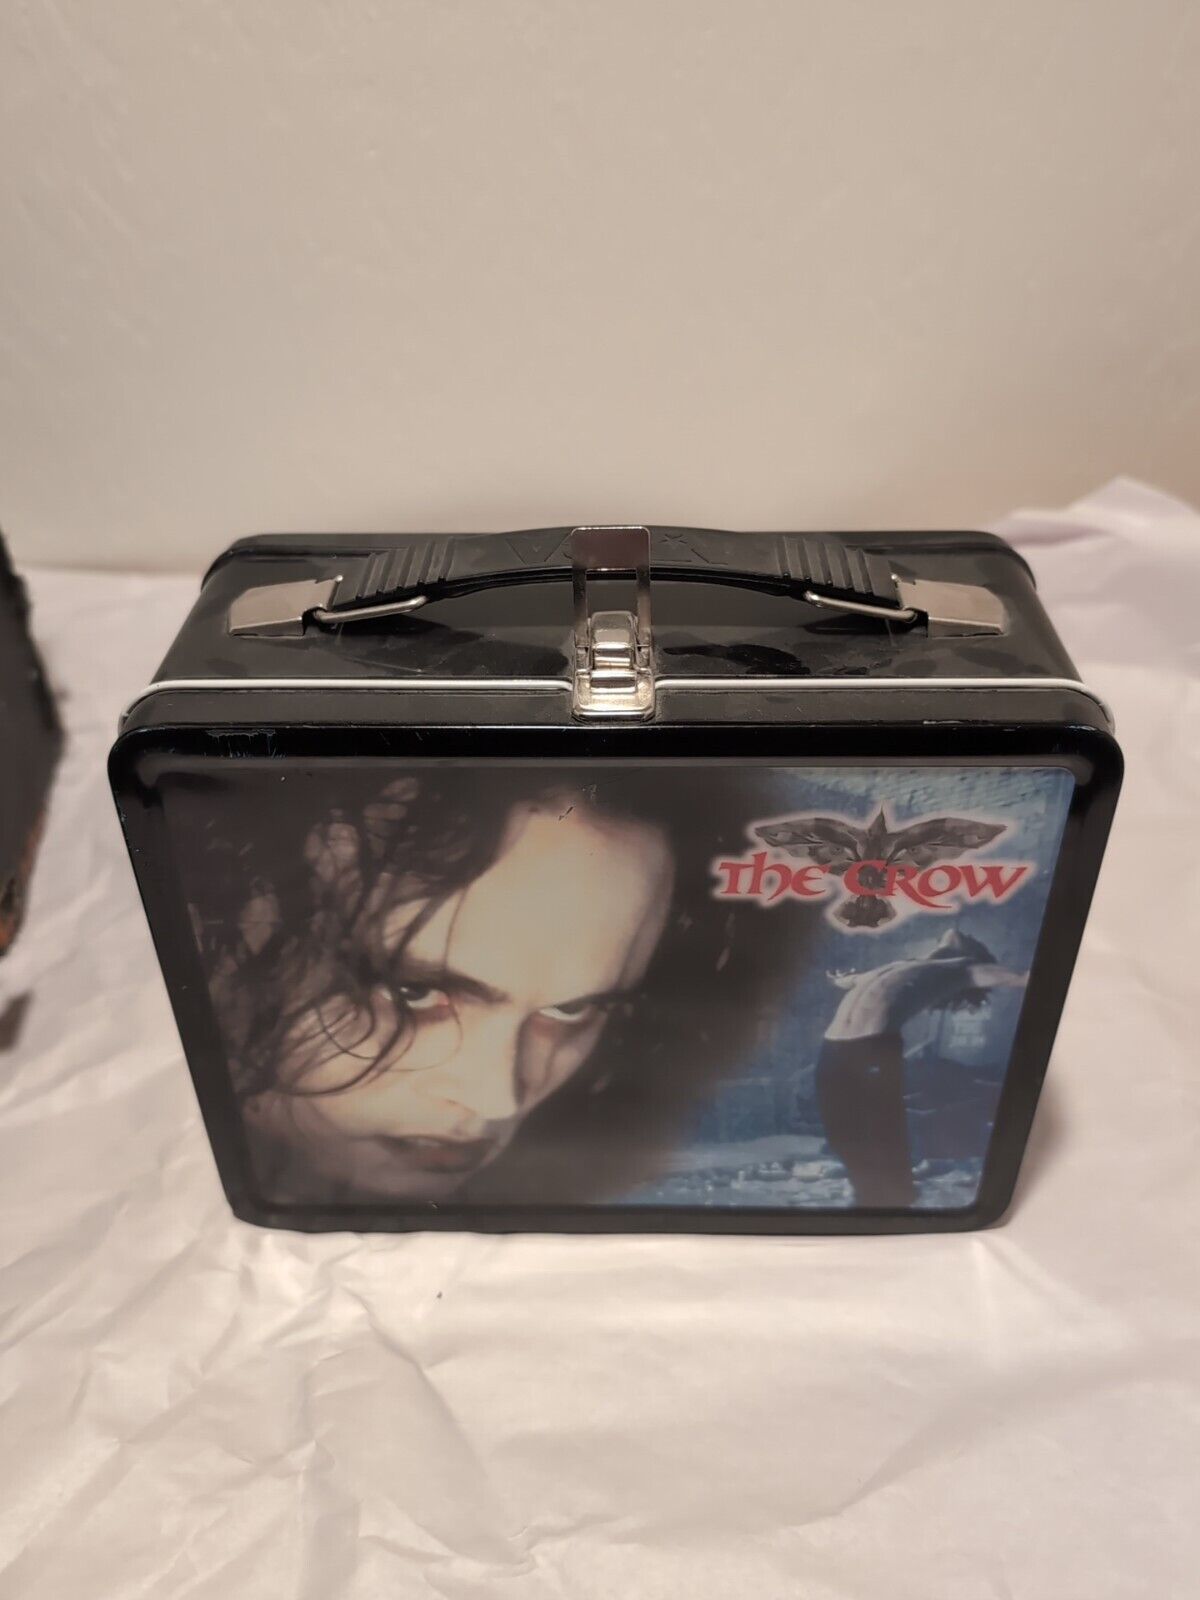 The Crow Metal Lunchbox Vintage 2001 NECA Limited Edition Brandon Lee